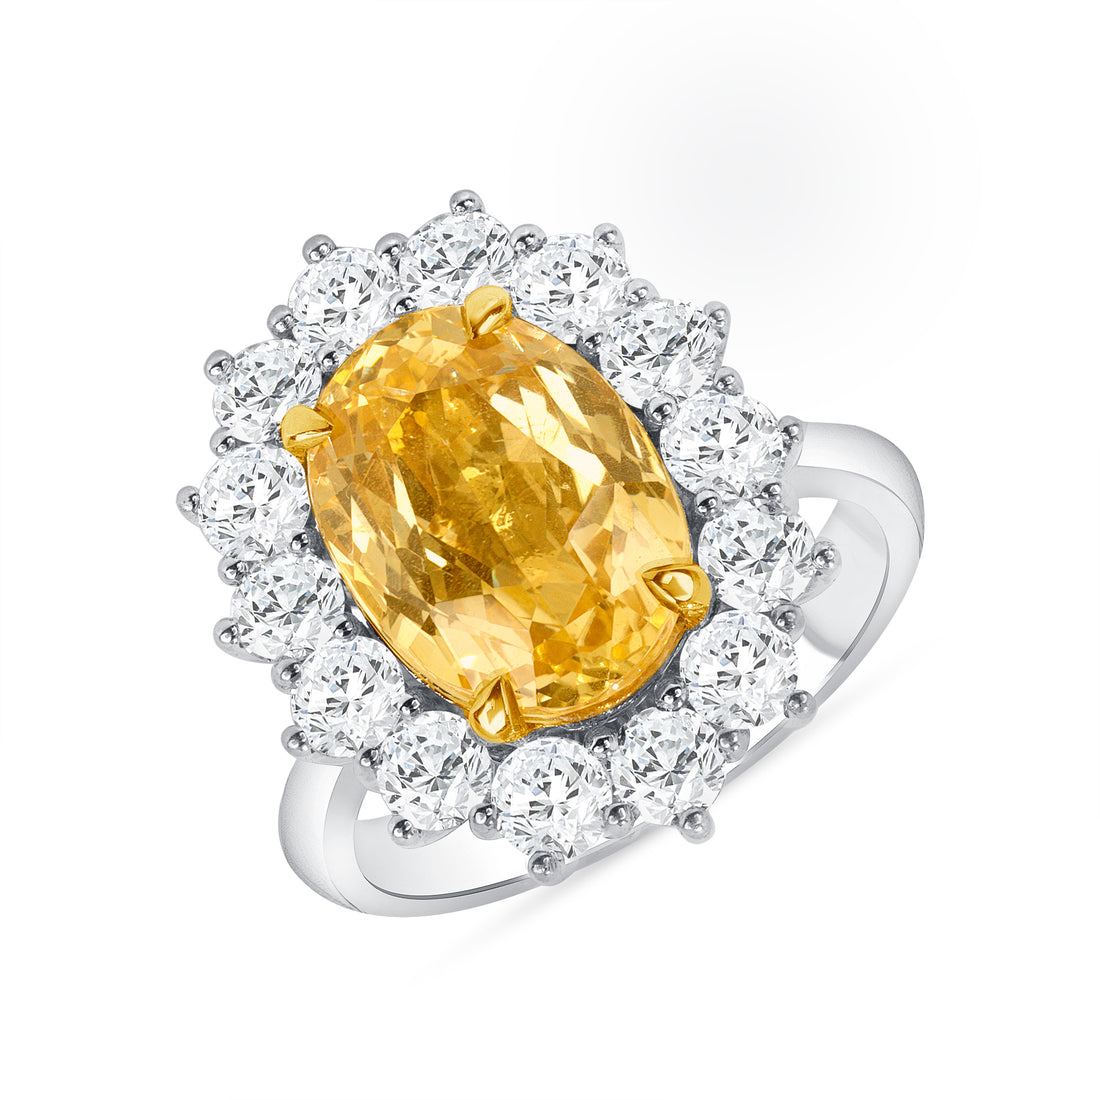 7.86 CT. Oval Yellow Sapphire and Round Brilliant Diamond Ring in Platinum